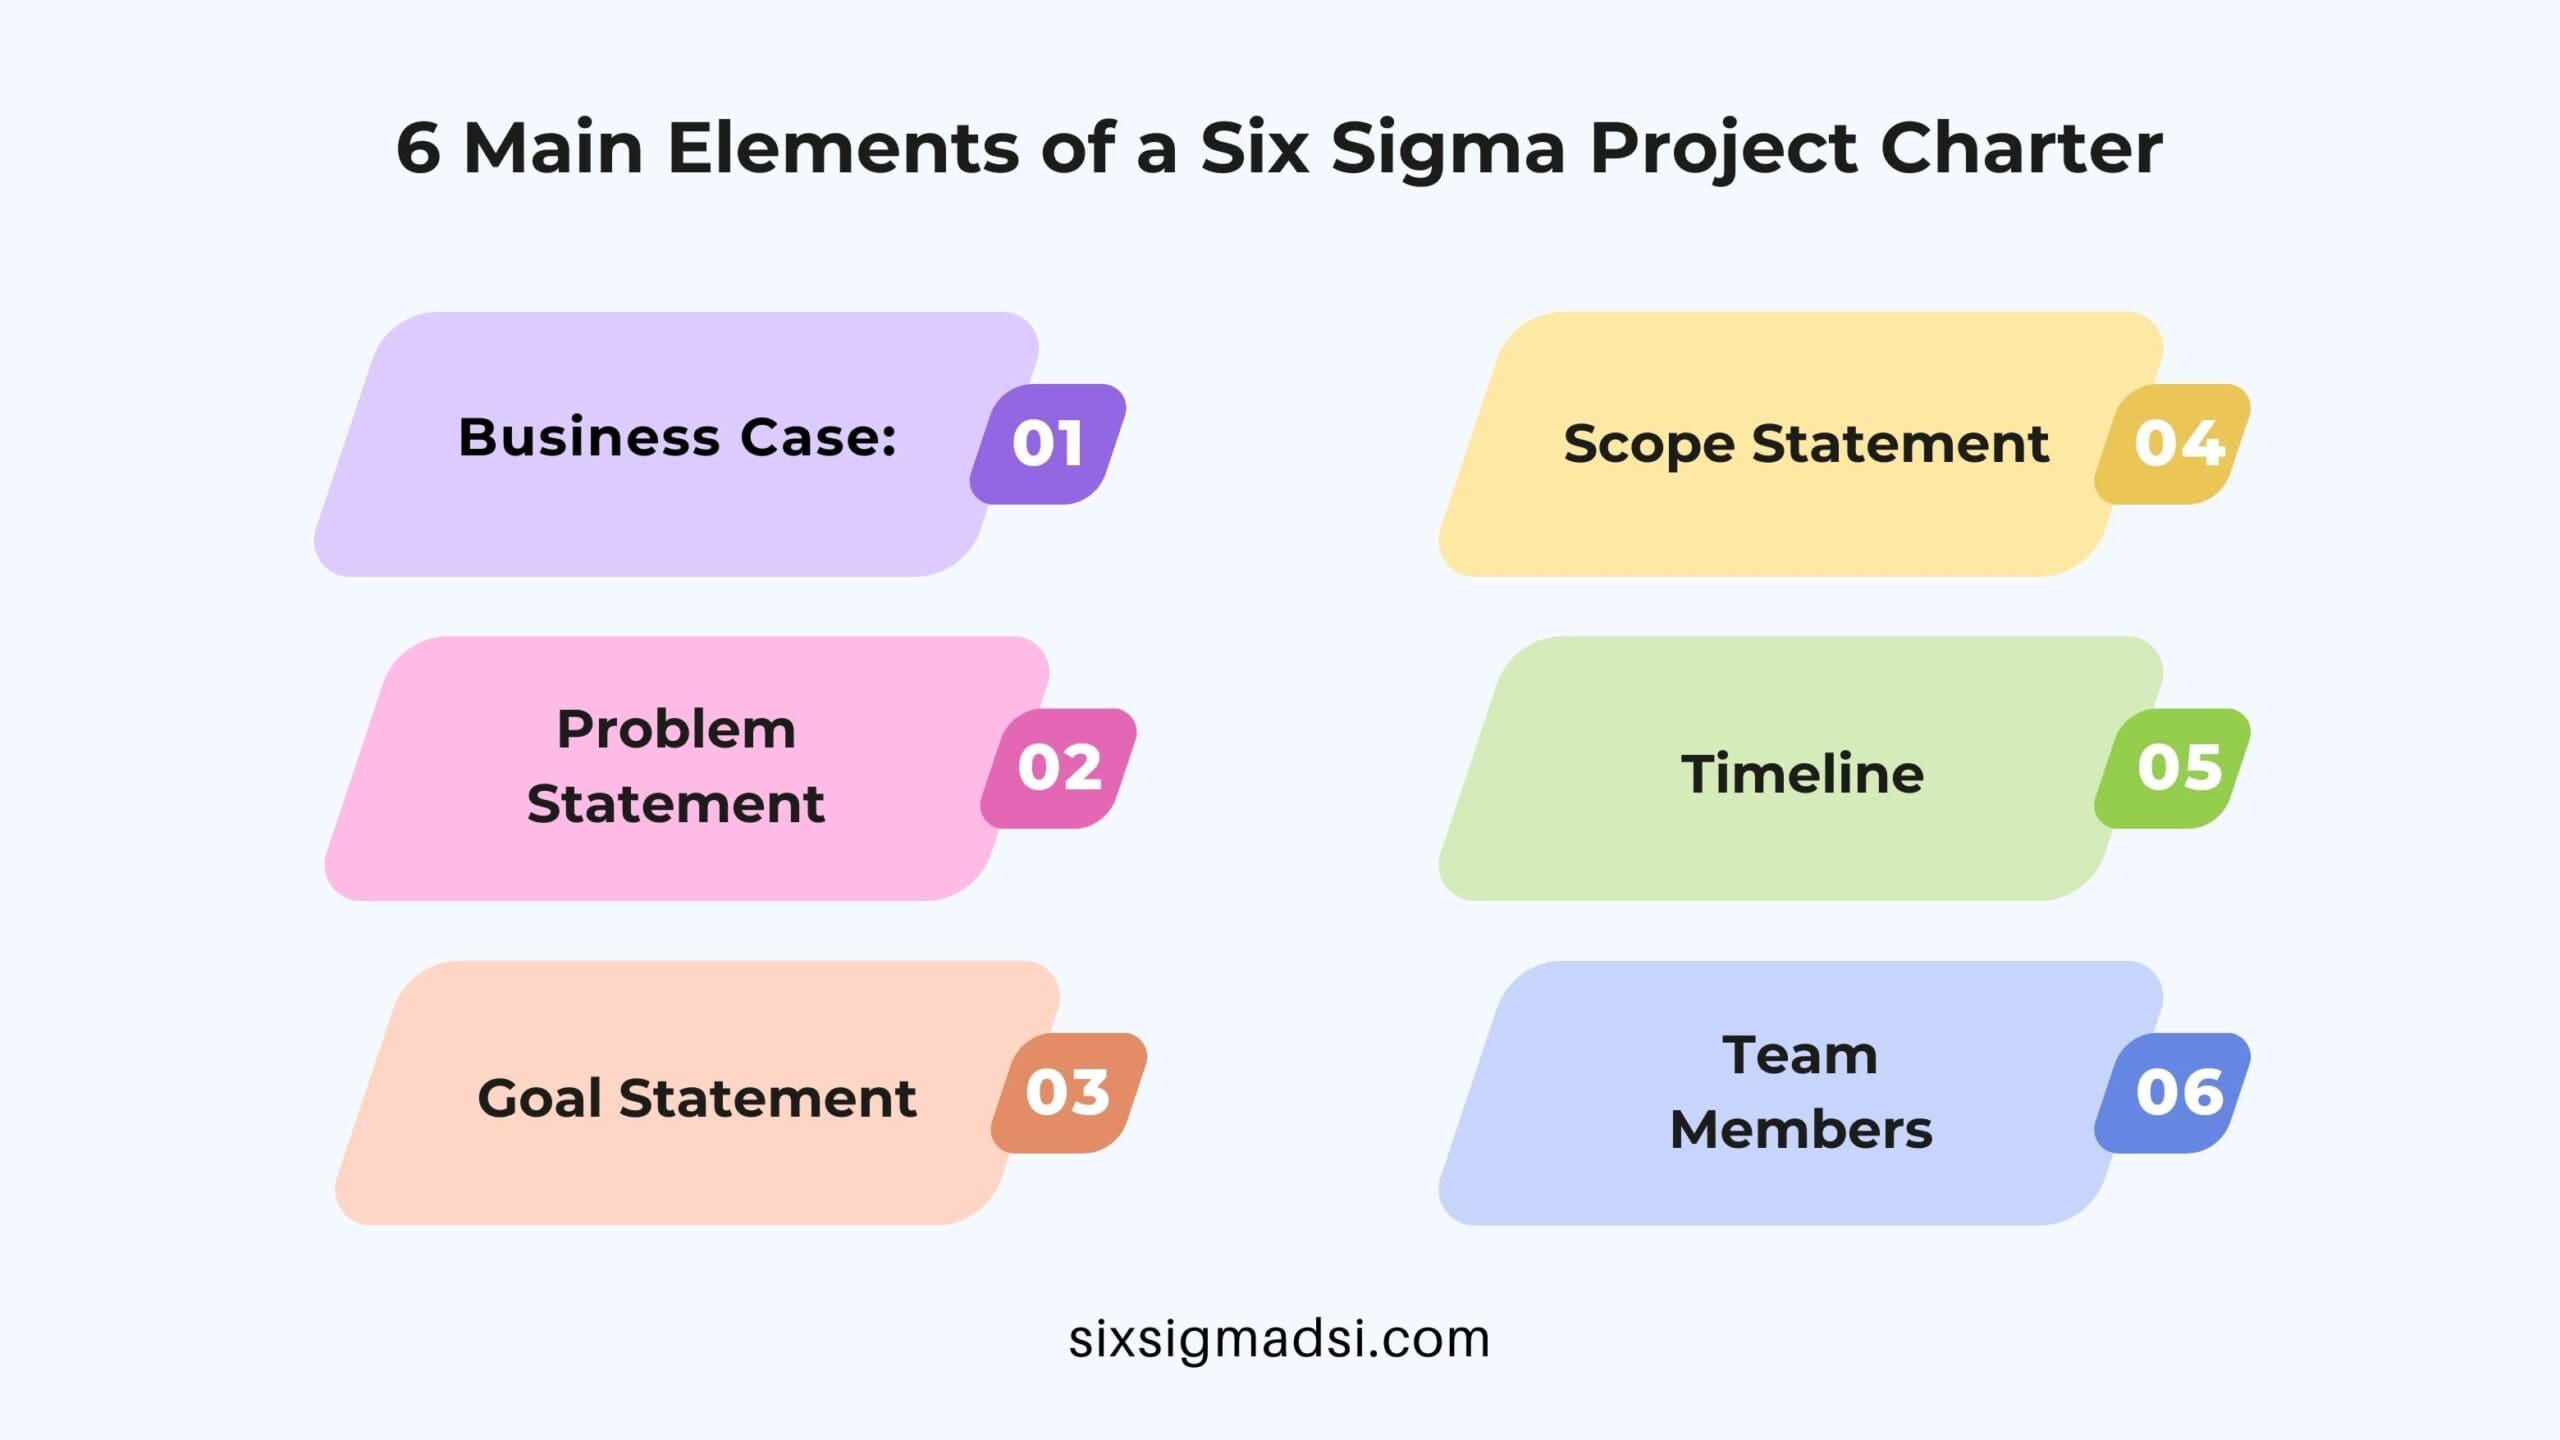 How to Complete a Lean Six Sigma Project Charter